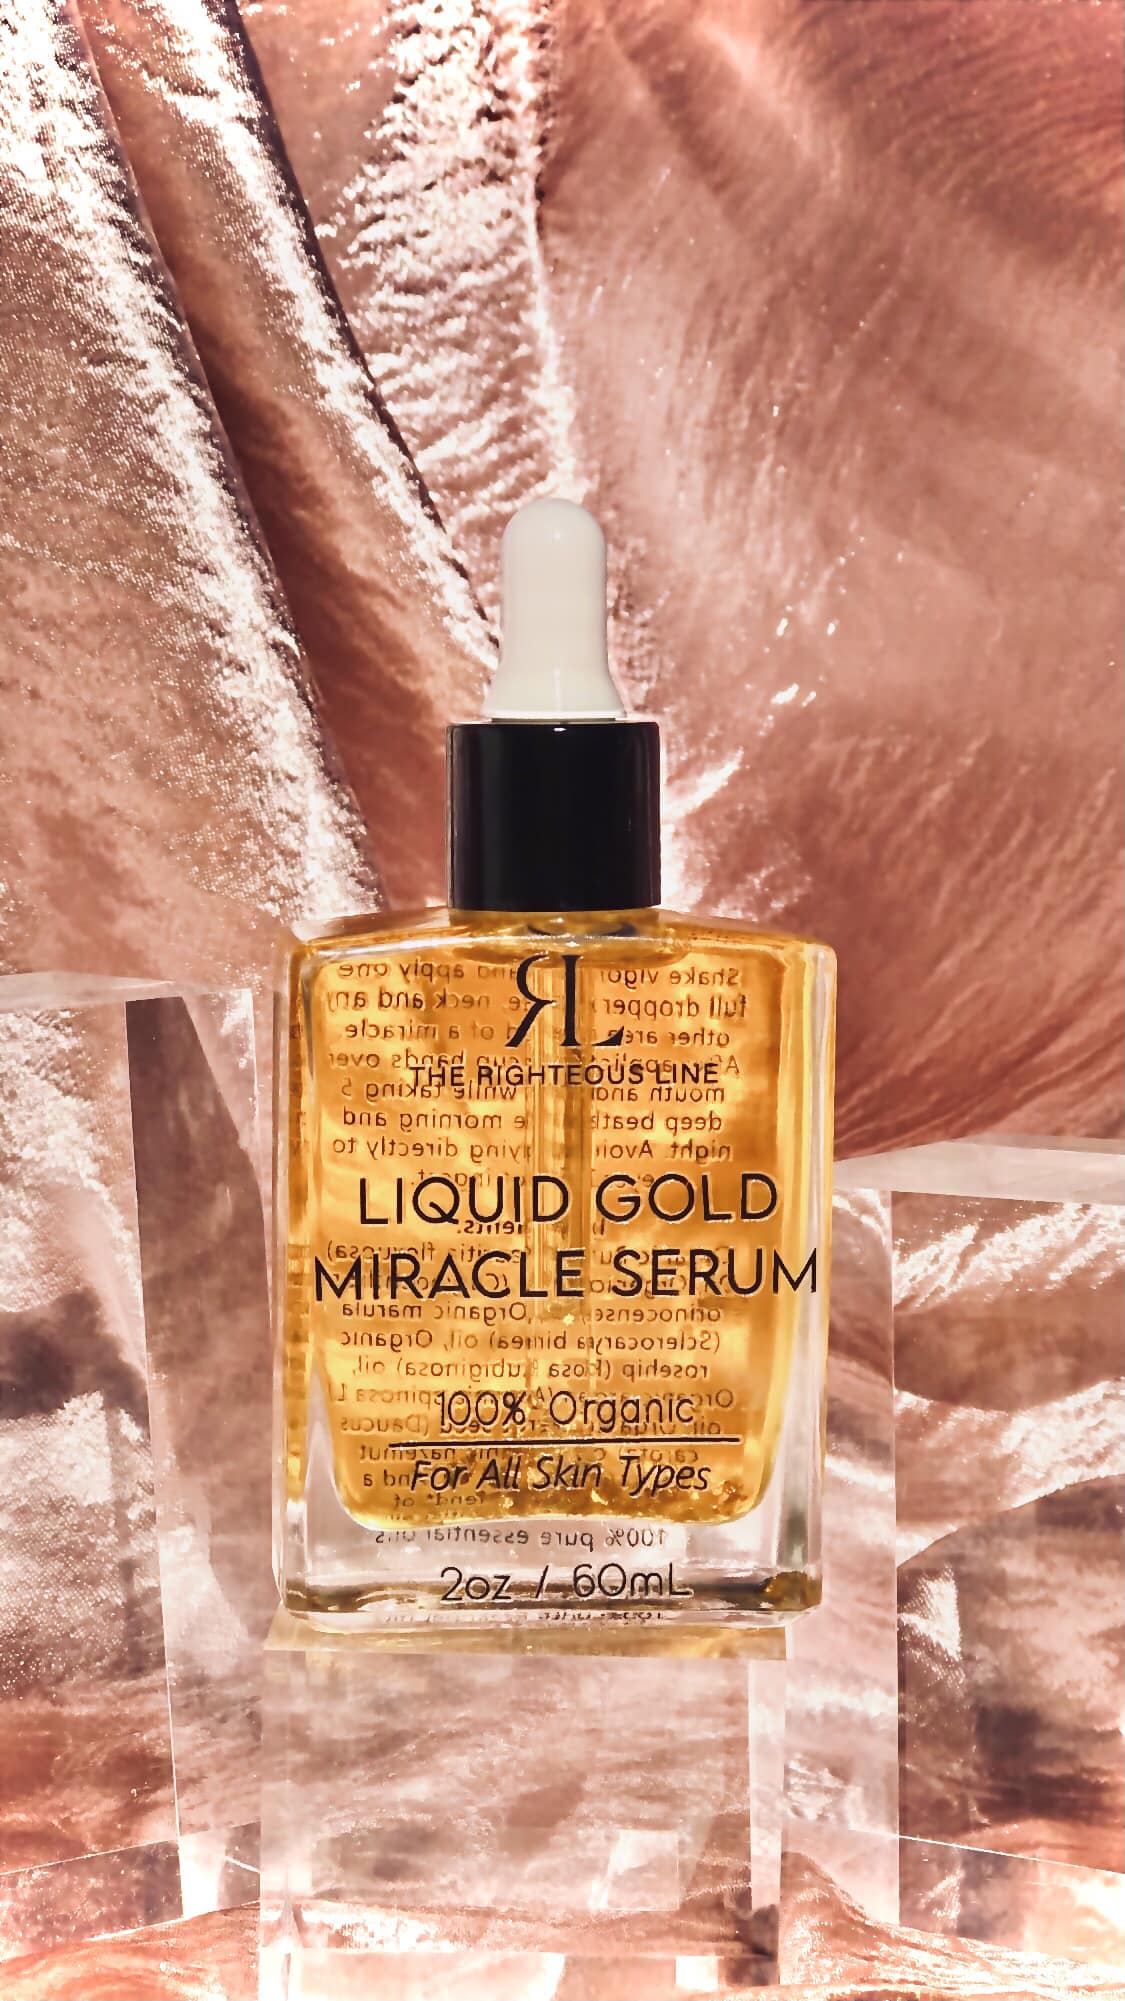 Front View. The Righteous Line Liquid Gold Miracle Serum-Beauty & Wellness-The Righteous Line-Market Street Nest, Fashionable Clothing, Shoes and Home Décor Located in Mabank, TX